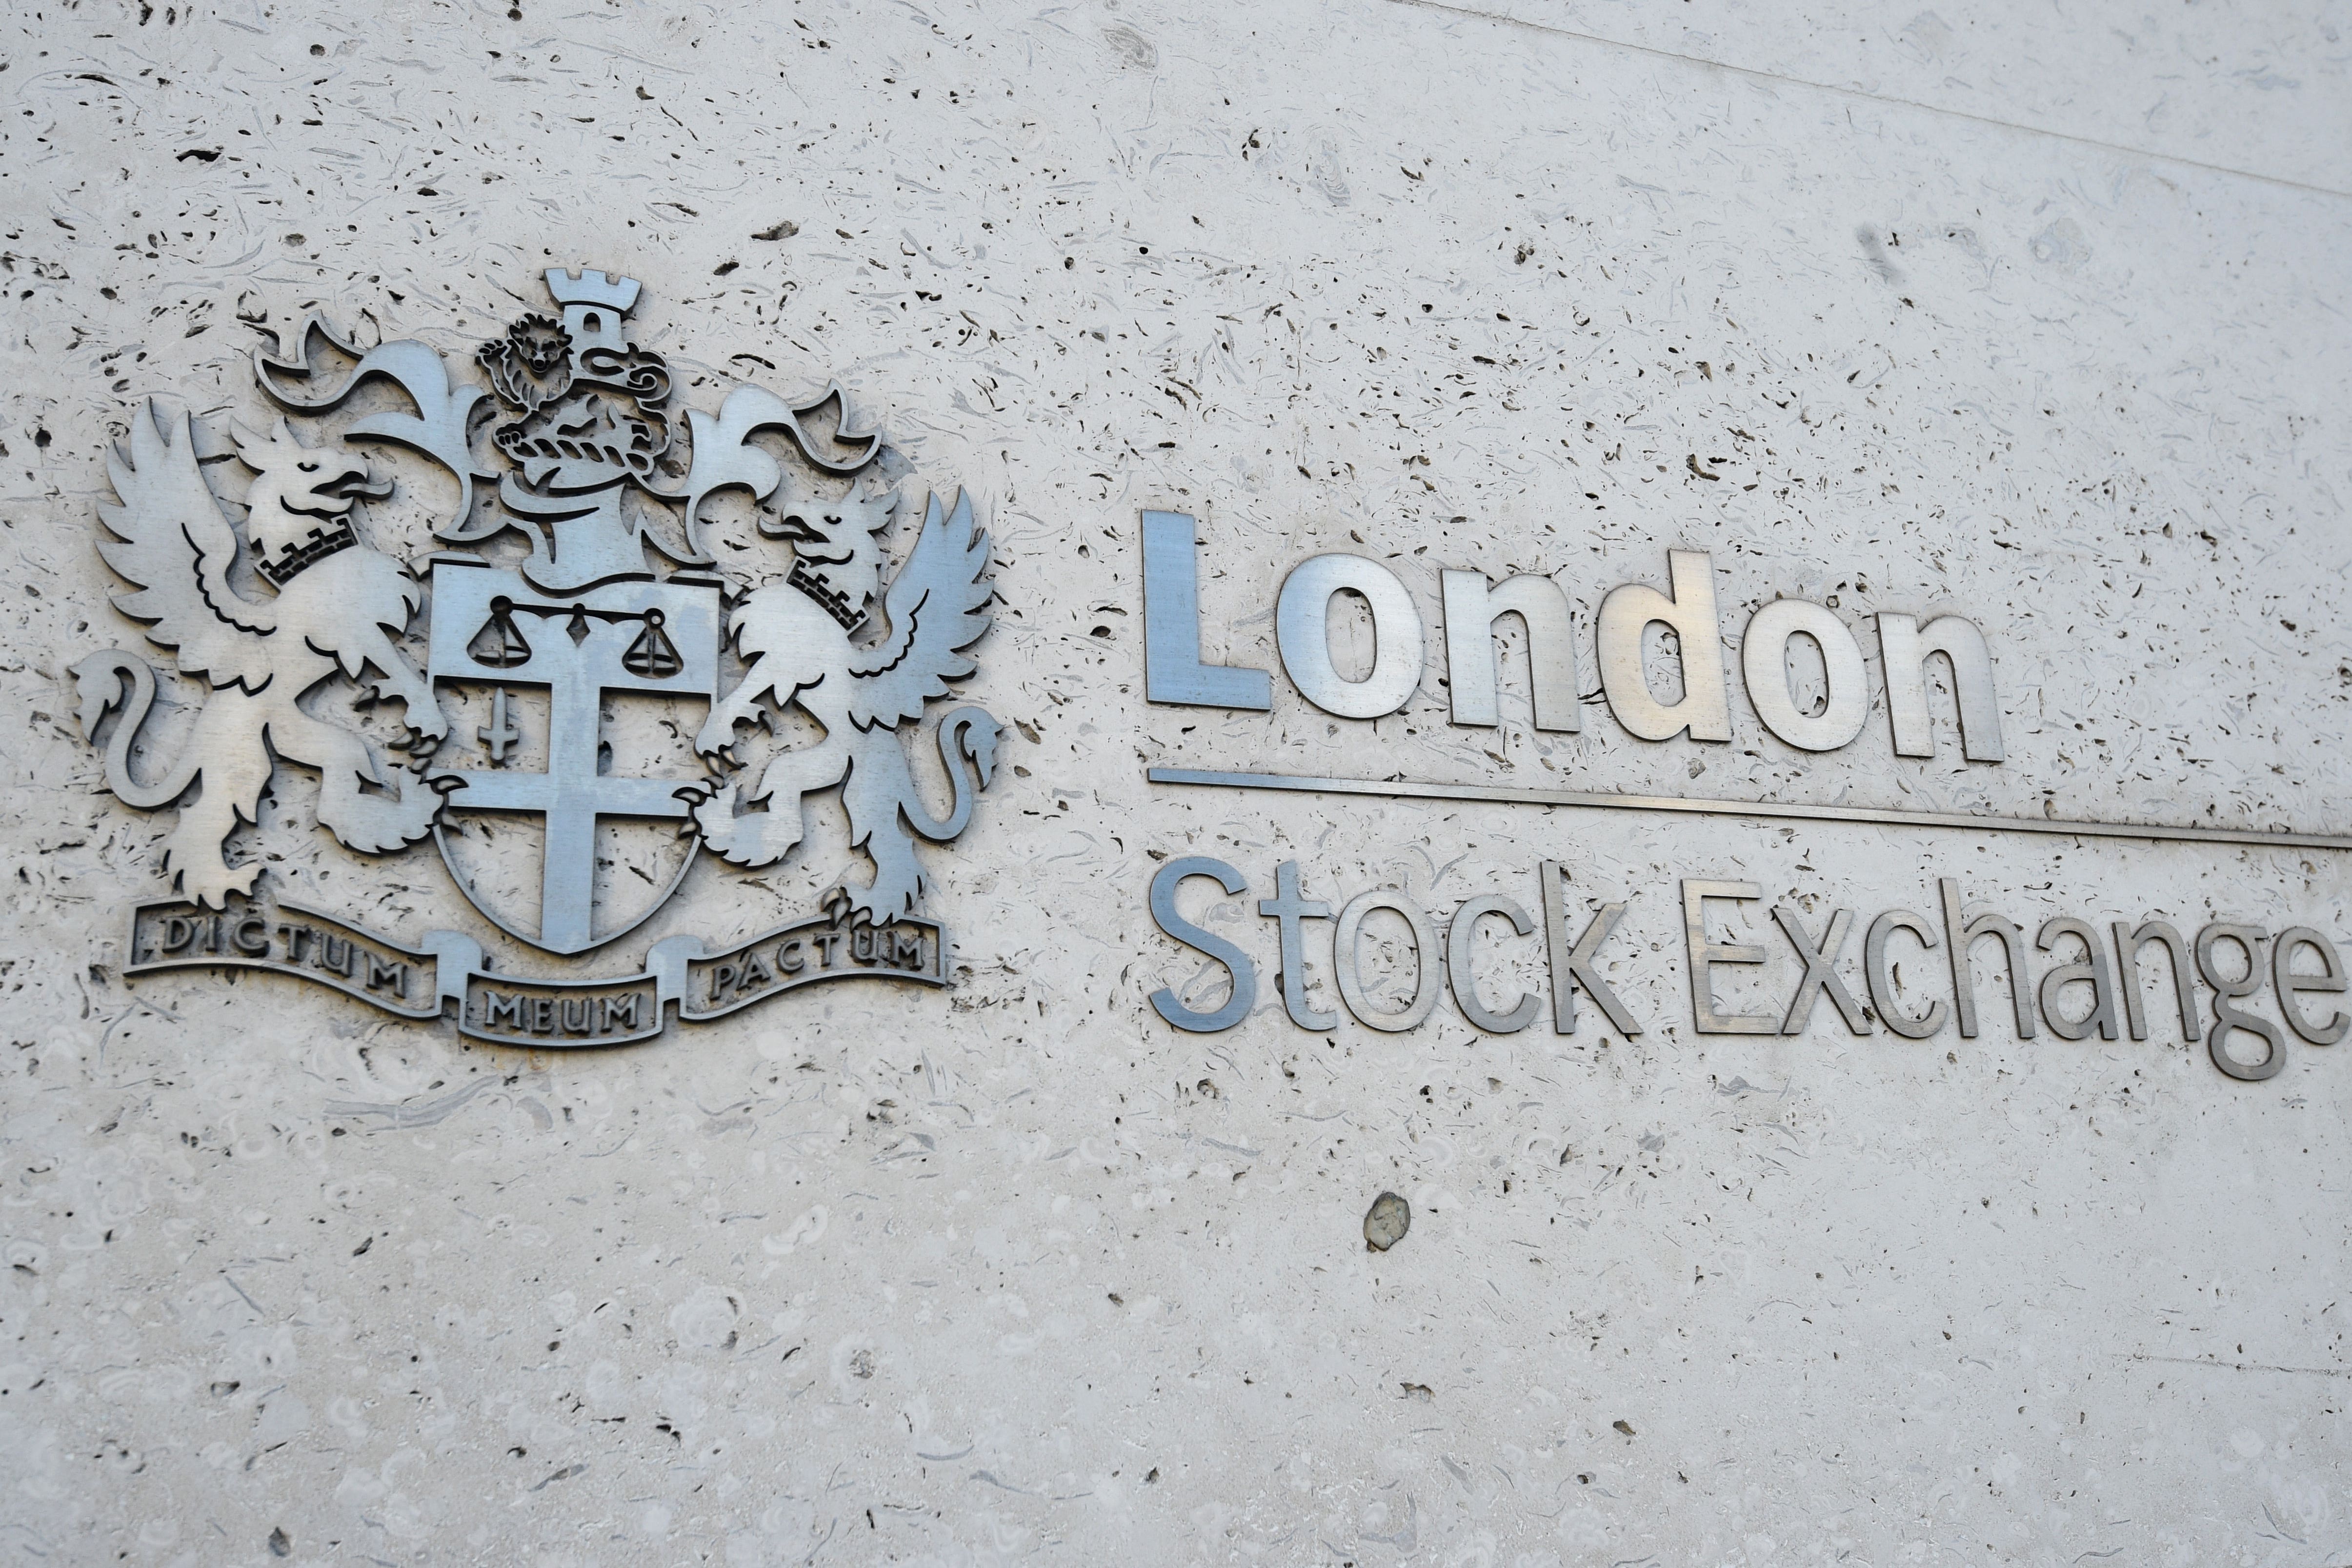 London’s top index ended the day up 42.59 points, or 0.61%, at 7,056.07 (Kirsty O’Connor/PA)